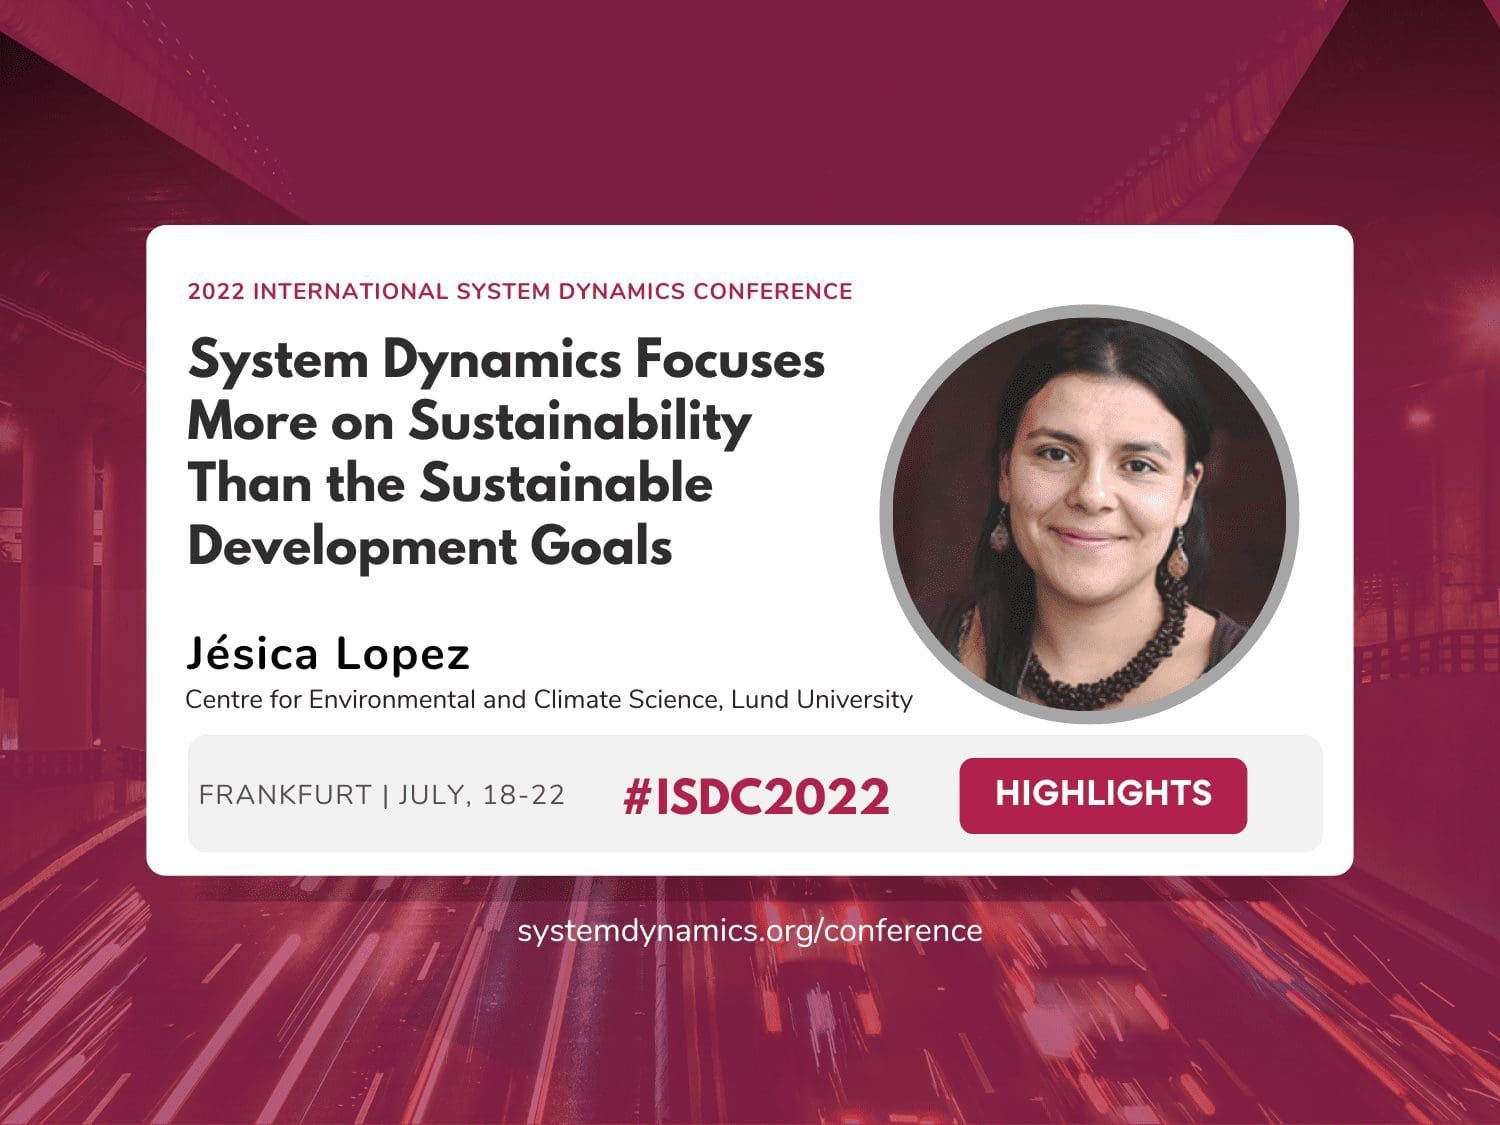 System Dynamics Focuses More on Sustainability Than the Sustainable Development Goals